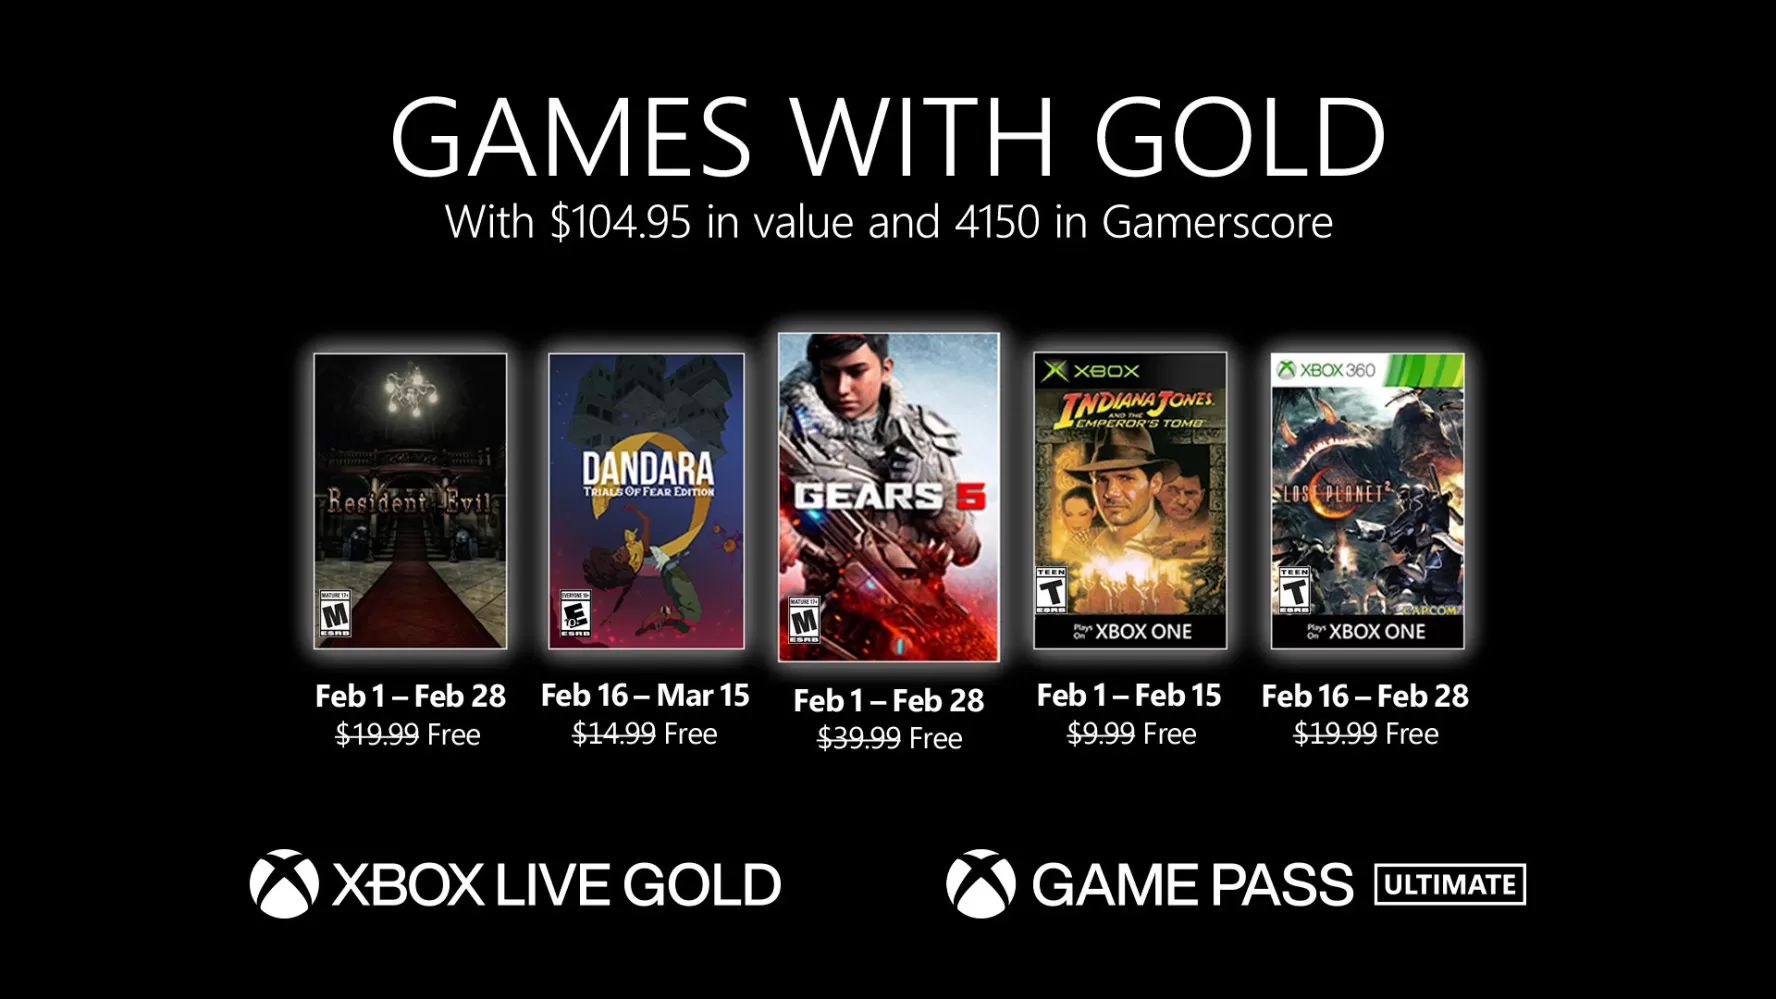 games with gold febrero 2021 gears 5